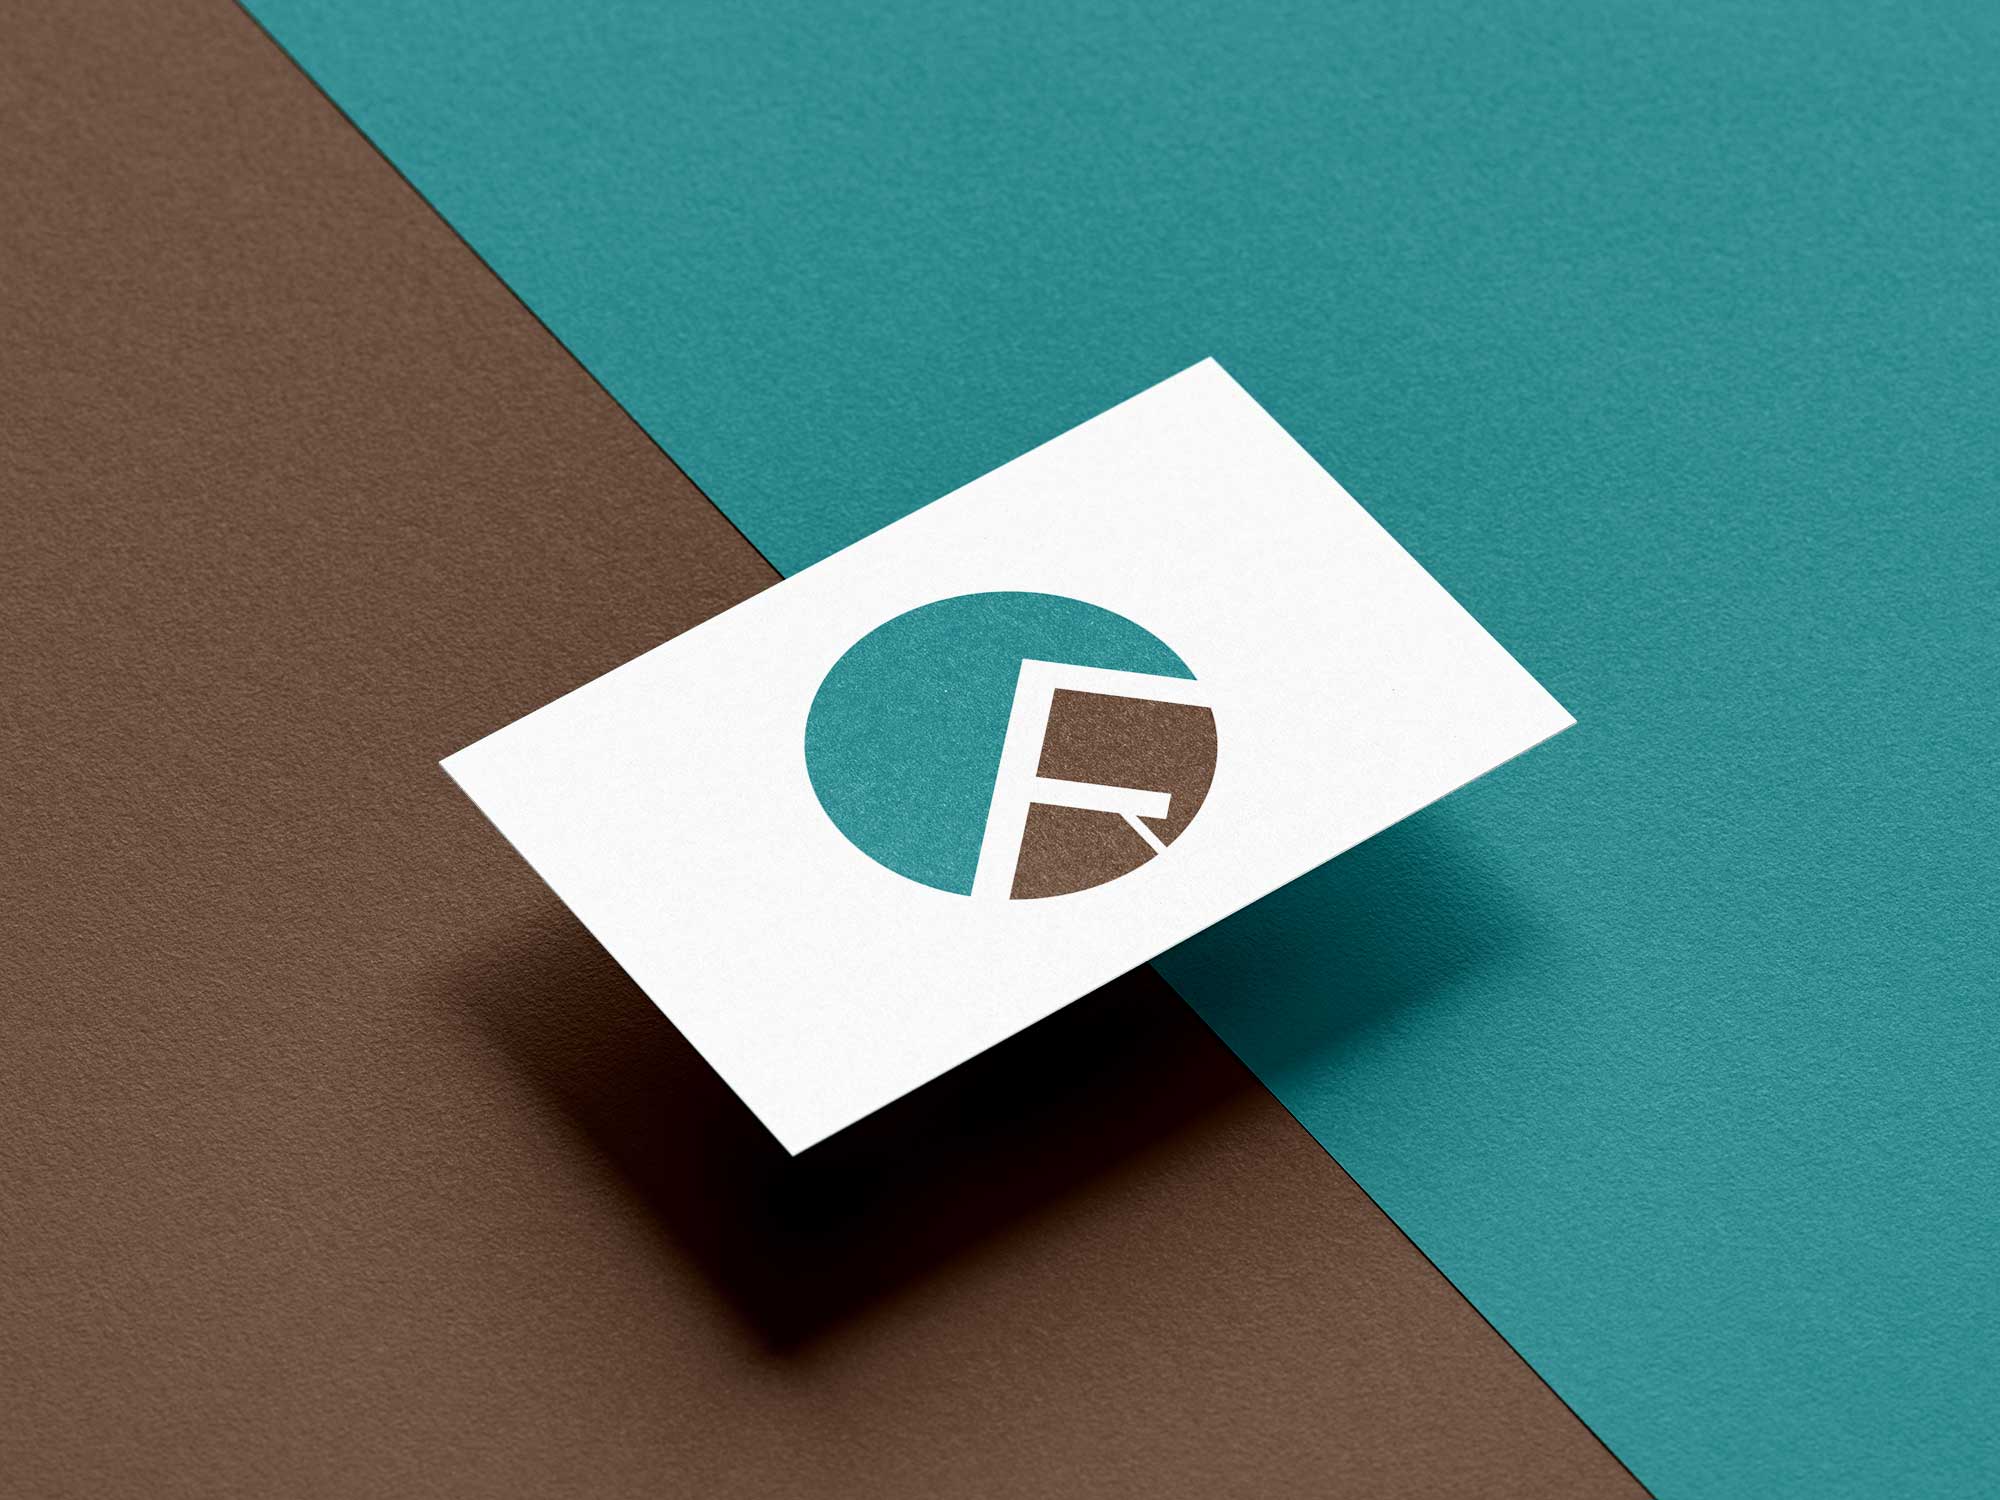 A business card with a company logo in the center of the card.